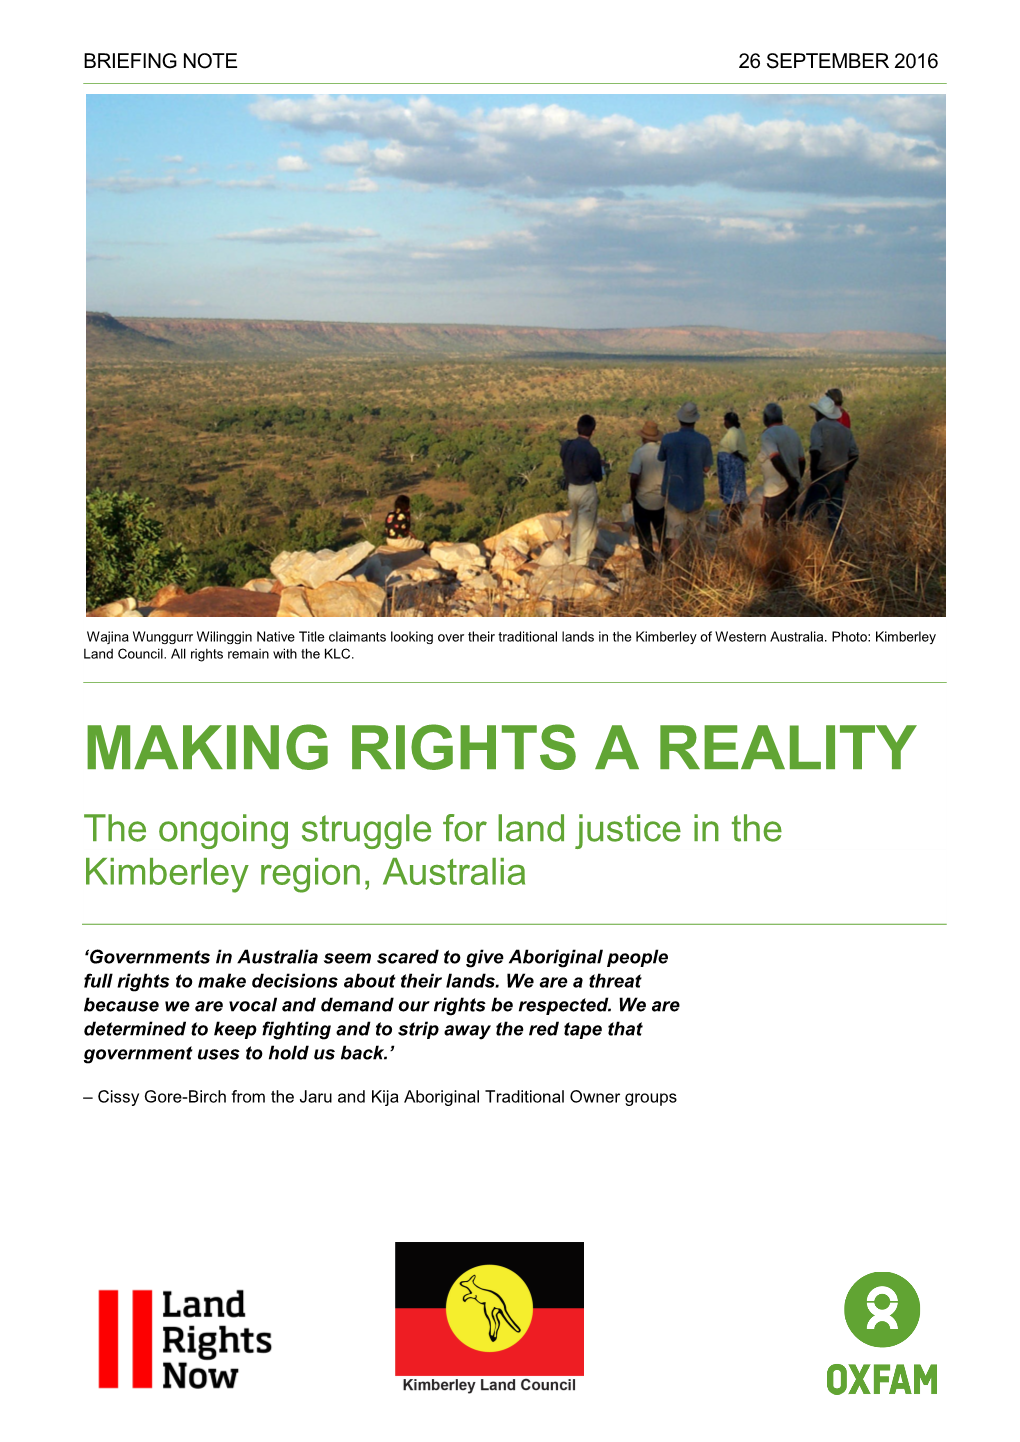 Making Rights a Reality: the Ongoing Struggle